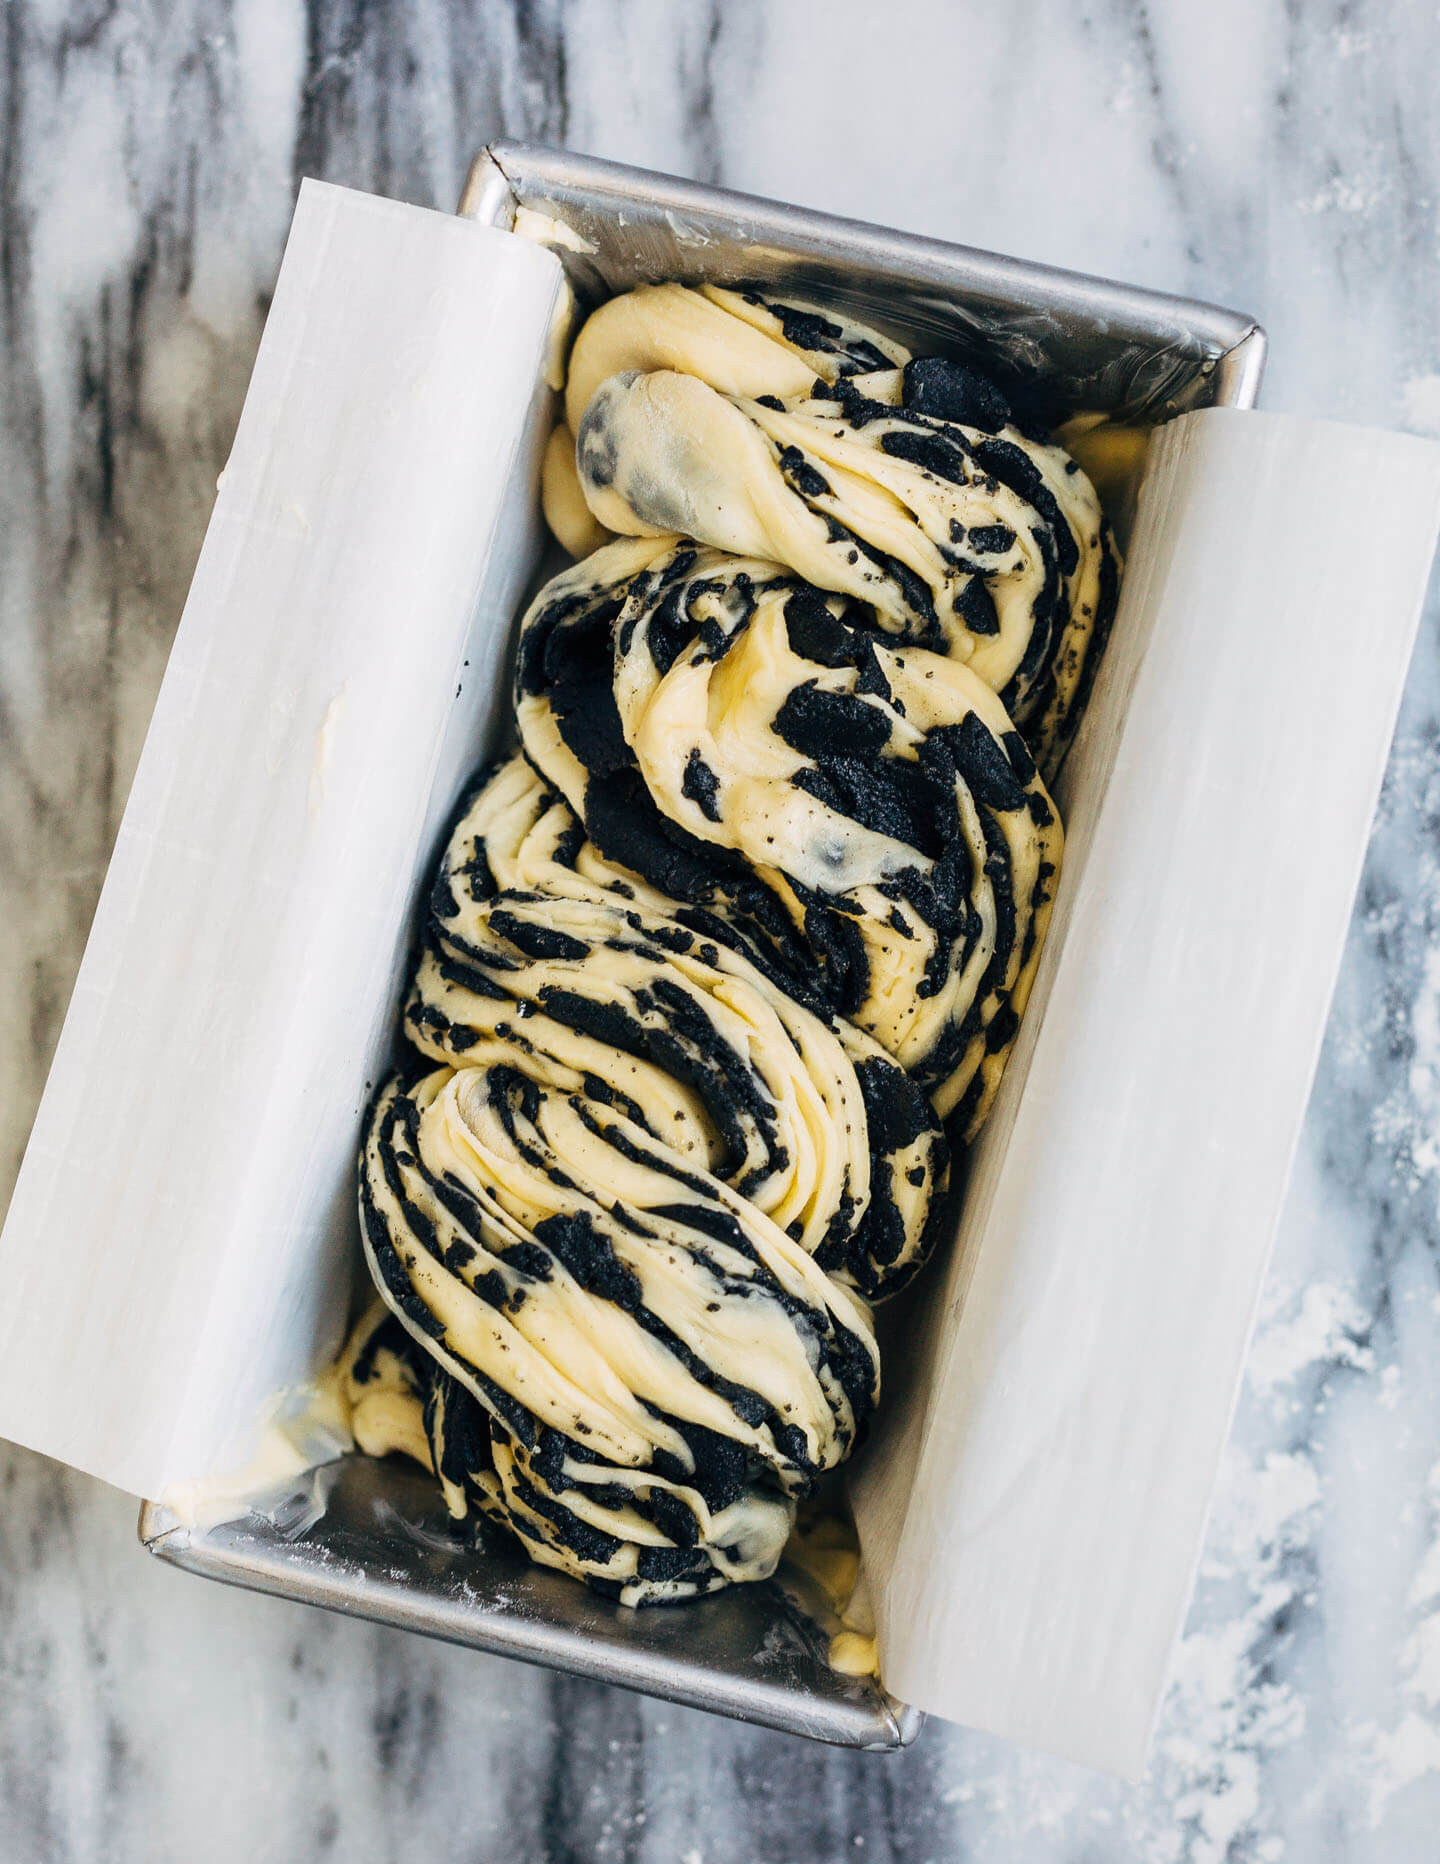 A sweet and pillowy yeasted twist bread recipe with nutty swirls of black sesame paste, from A Common Table by Cynthia Chen McTernan.